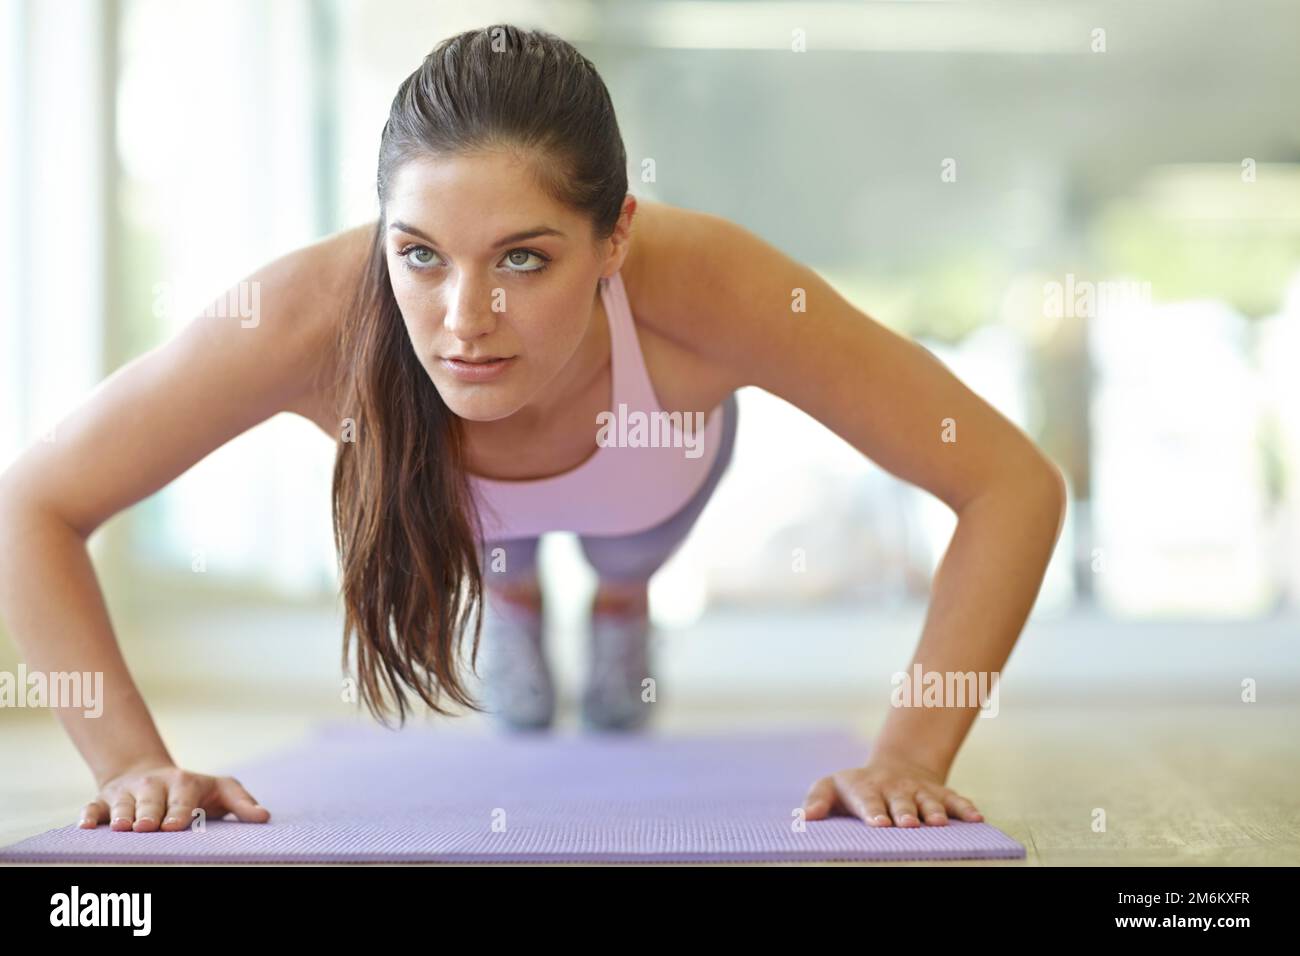 Focused on her push-ups. A beautiful young woman doing push-ups. Stock Photo